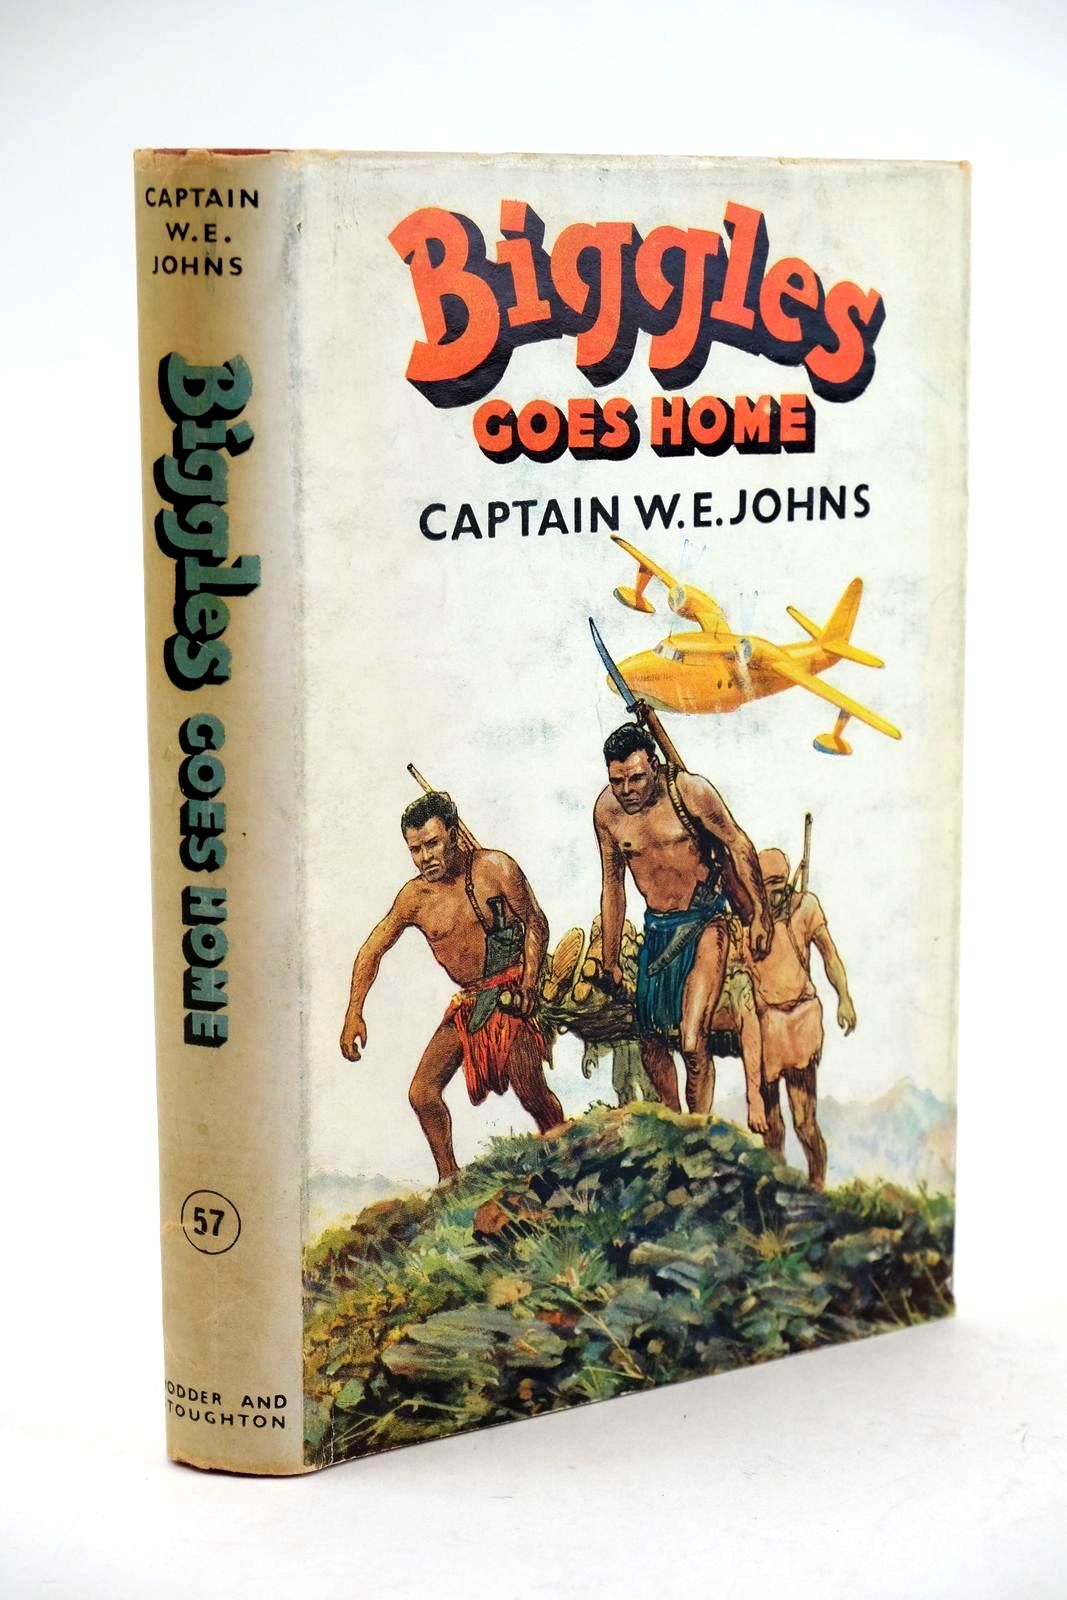 Photo of BIGGLES GOES HOME written by Johns, W.E. illustrated by Stead,  published by Hodder & Stoughton (STOCK CODE: 1324360)  for sale by Stella & Rose's Books